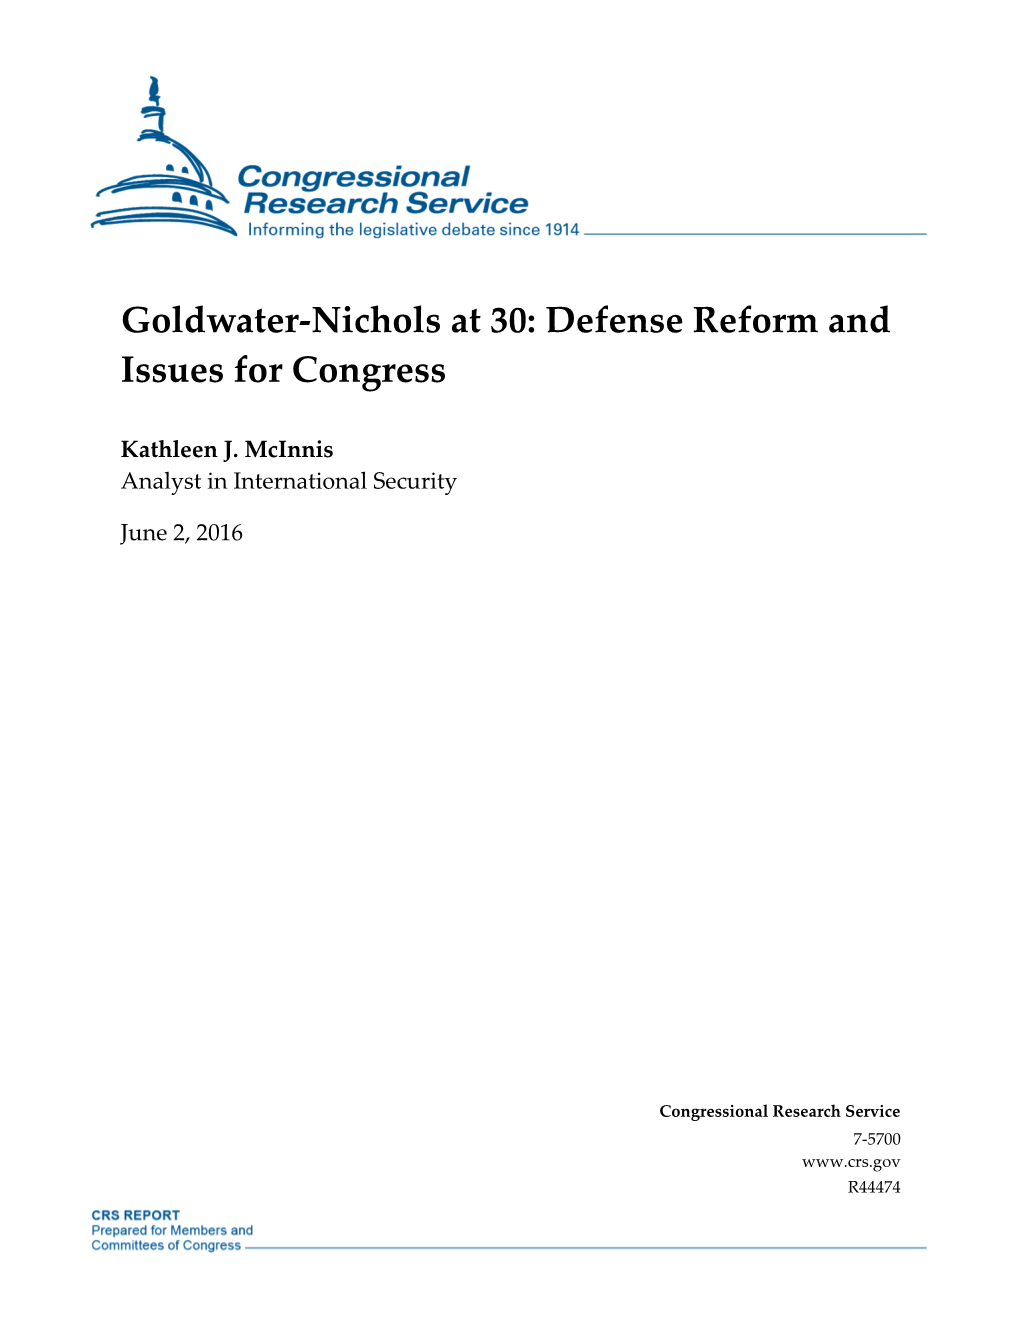 Goldwater-Nichols at 30: Defense Reform and Issues for Congress